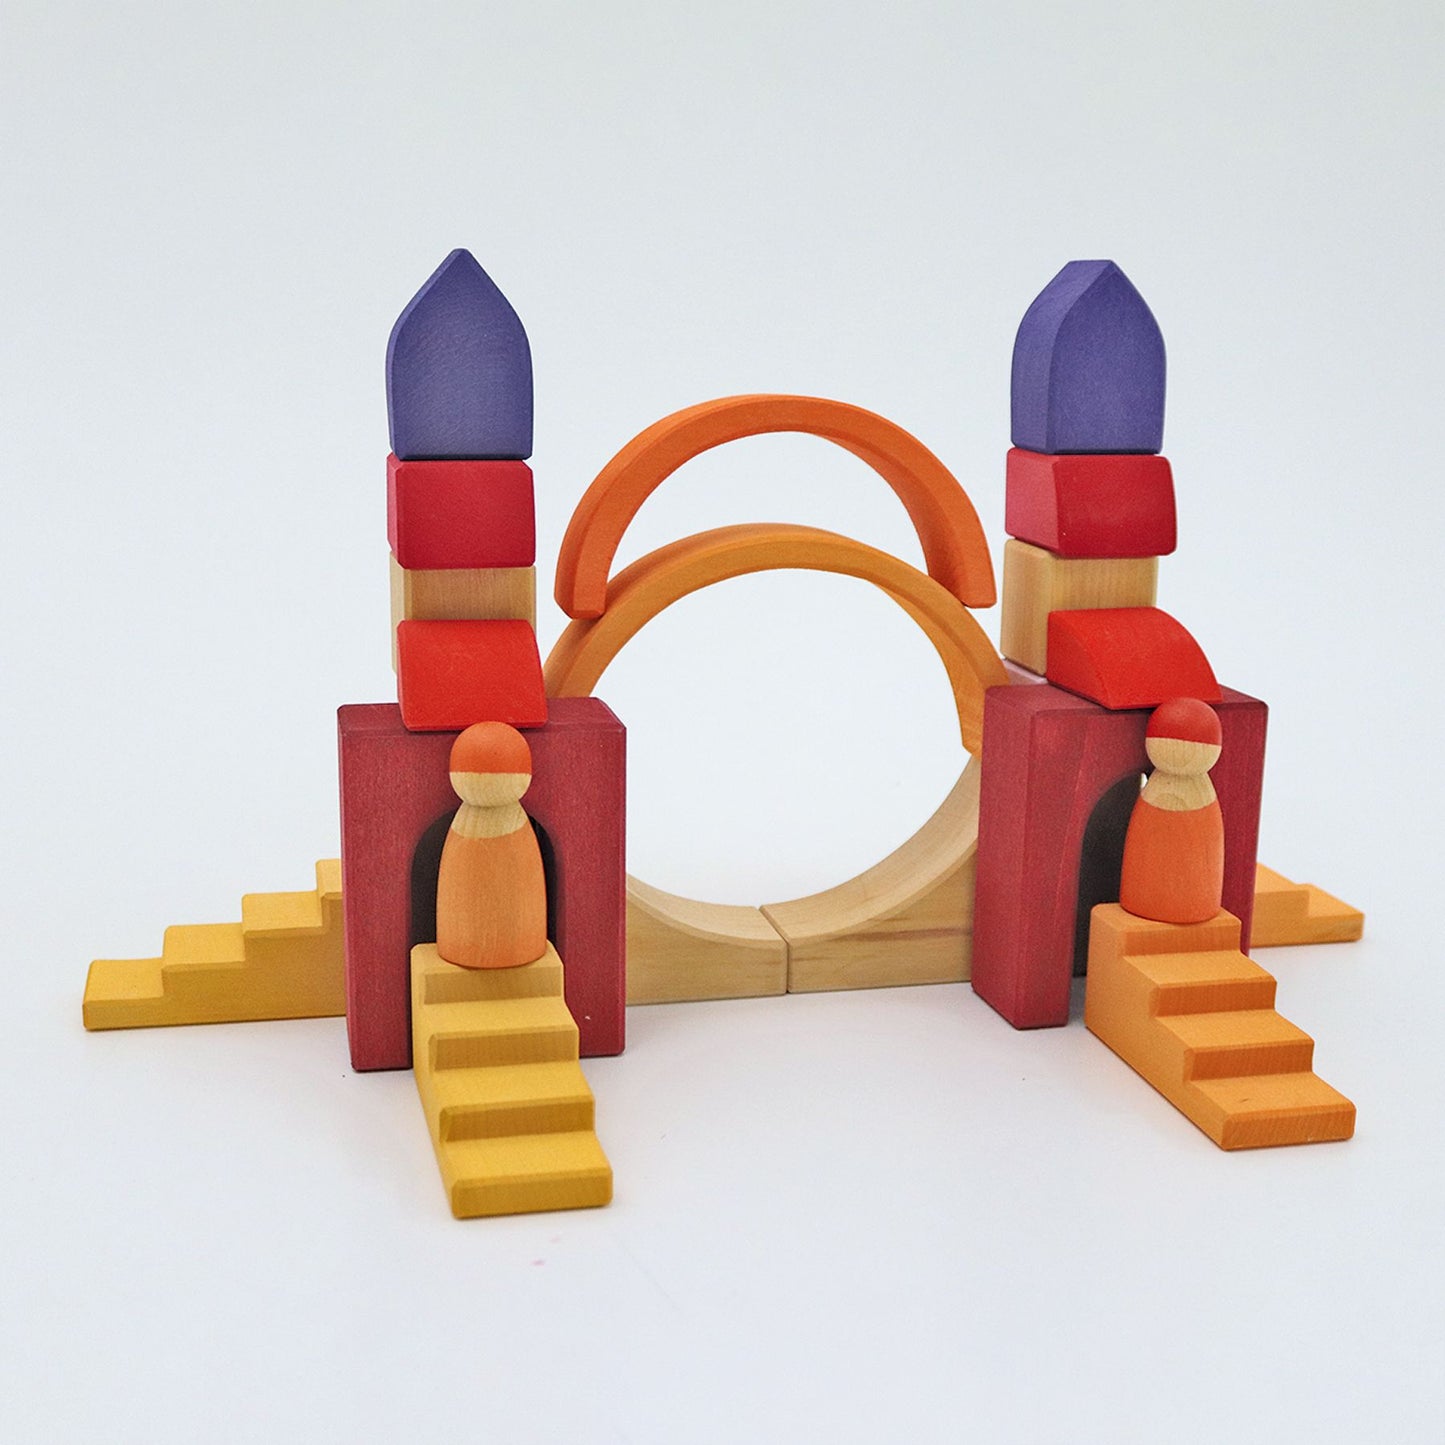 Building World Desert Sand | Small World Playset | Wooden Toys for Kids | Open-Ended Play